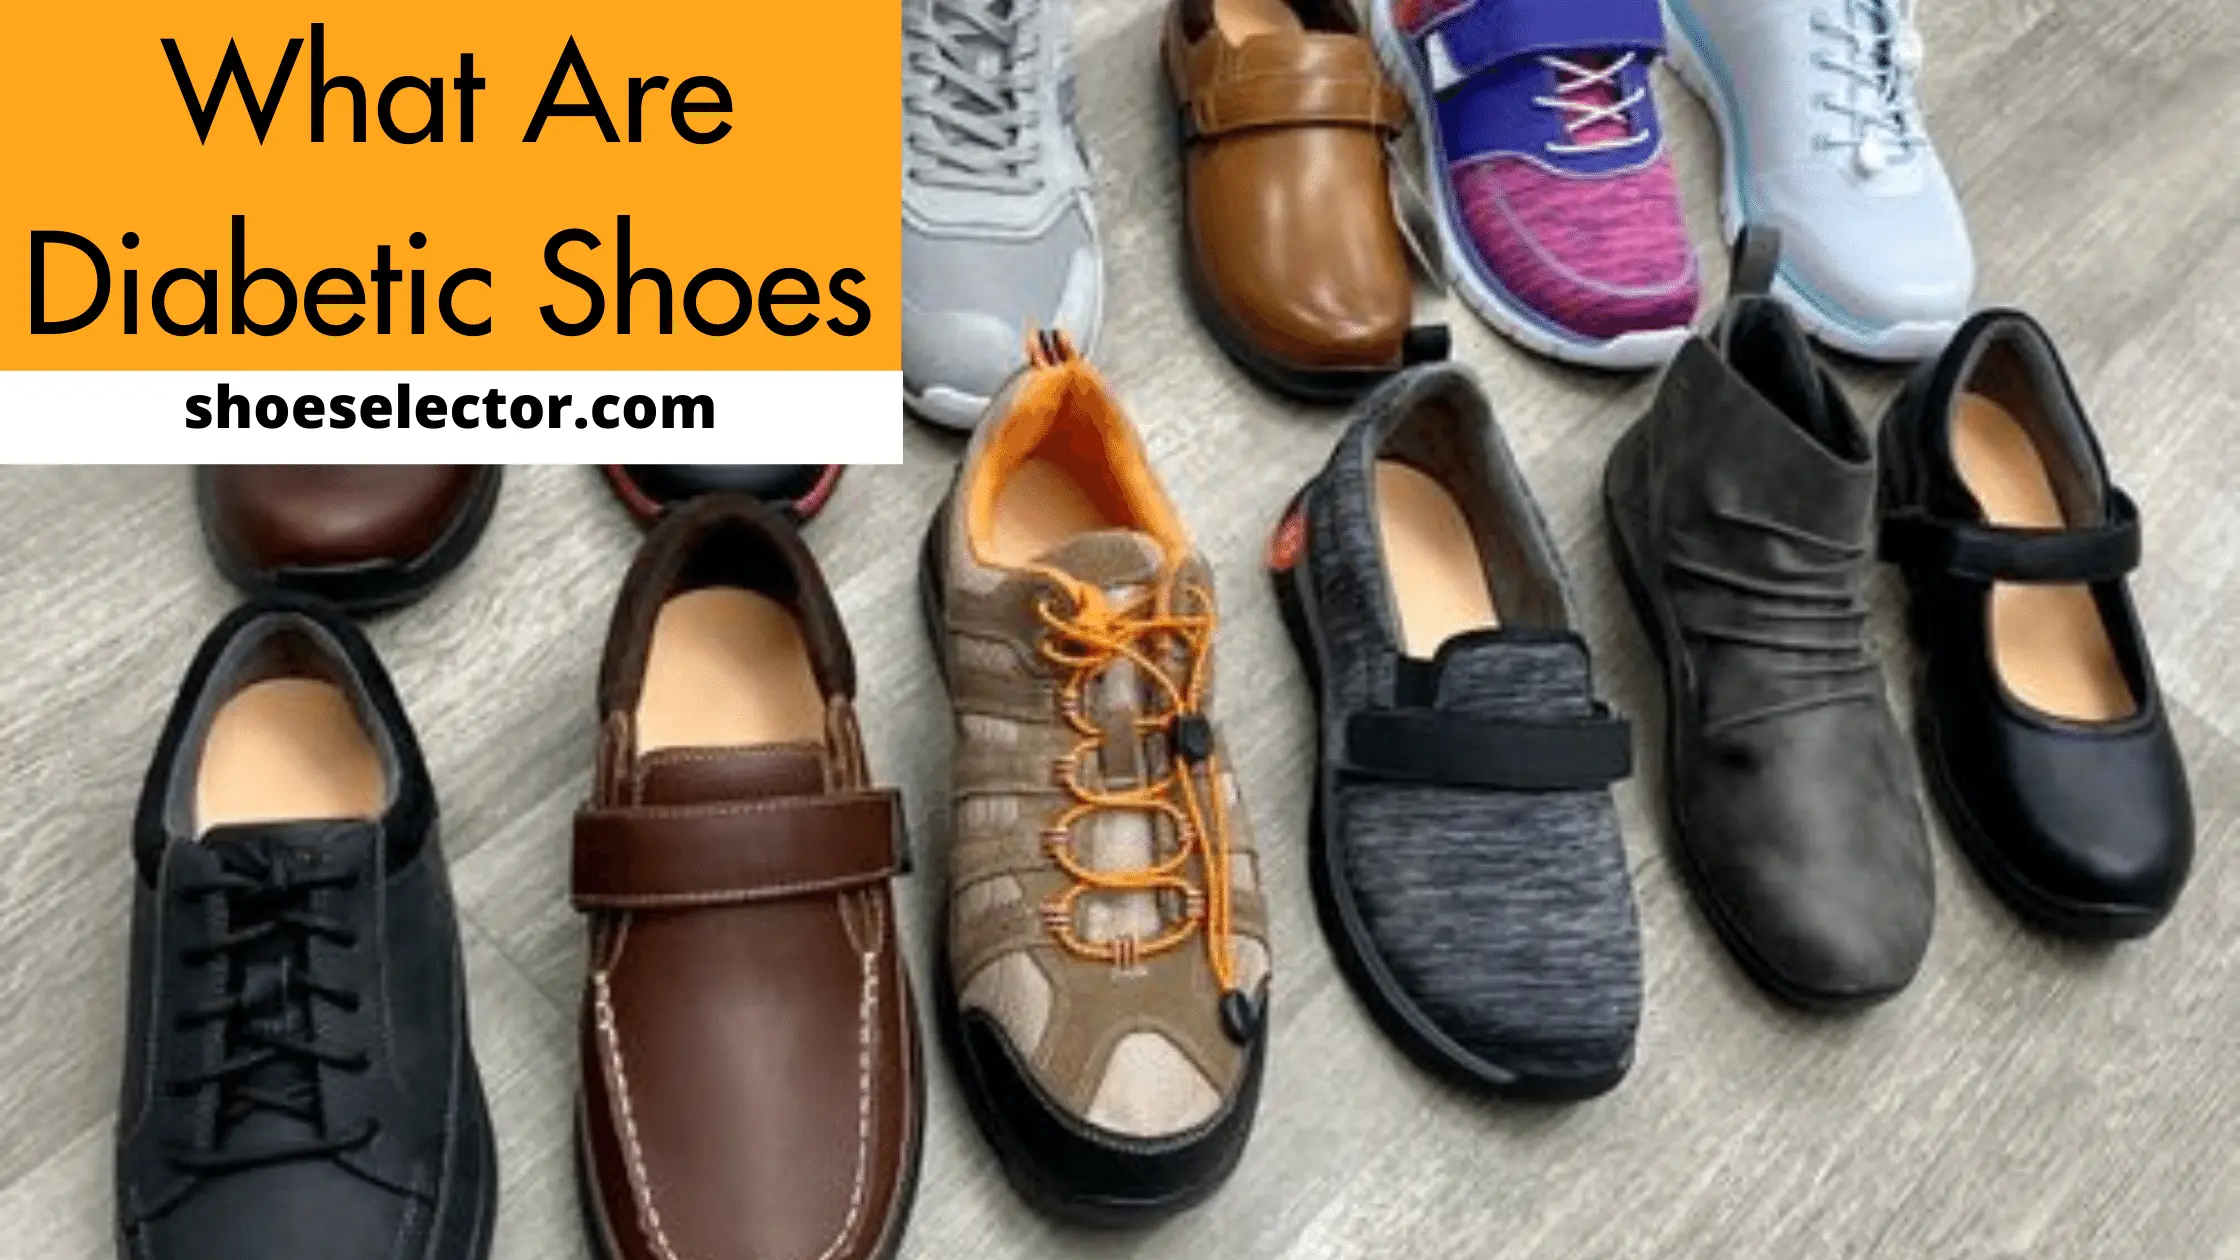 What Are Diabetic Shoes? - Simple Guide